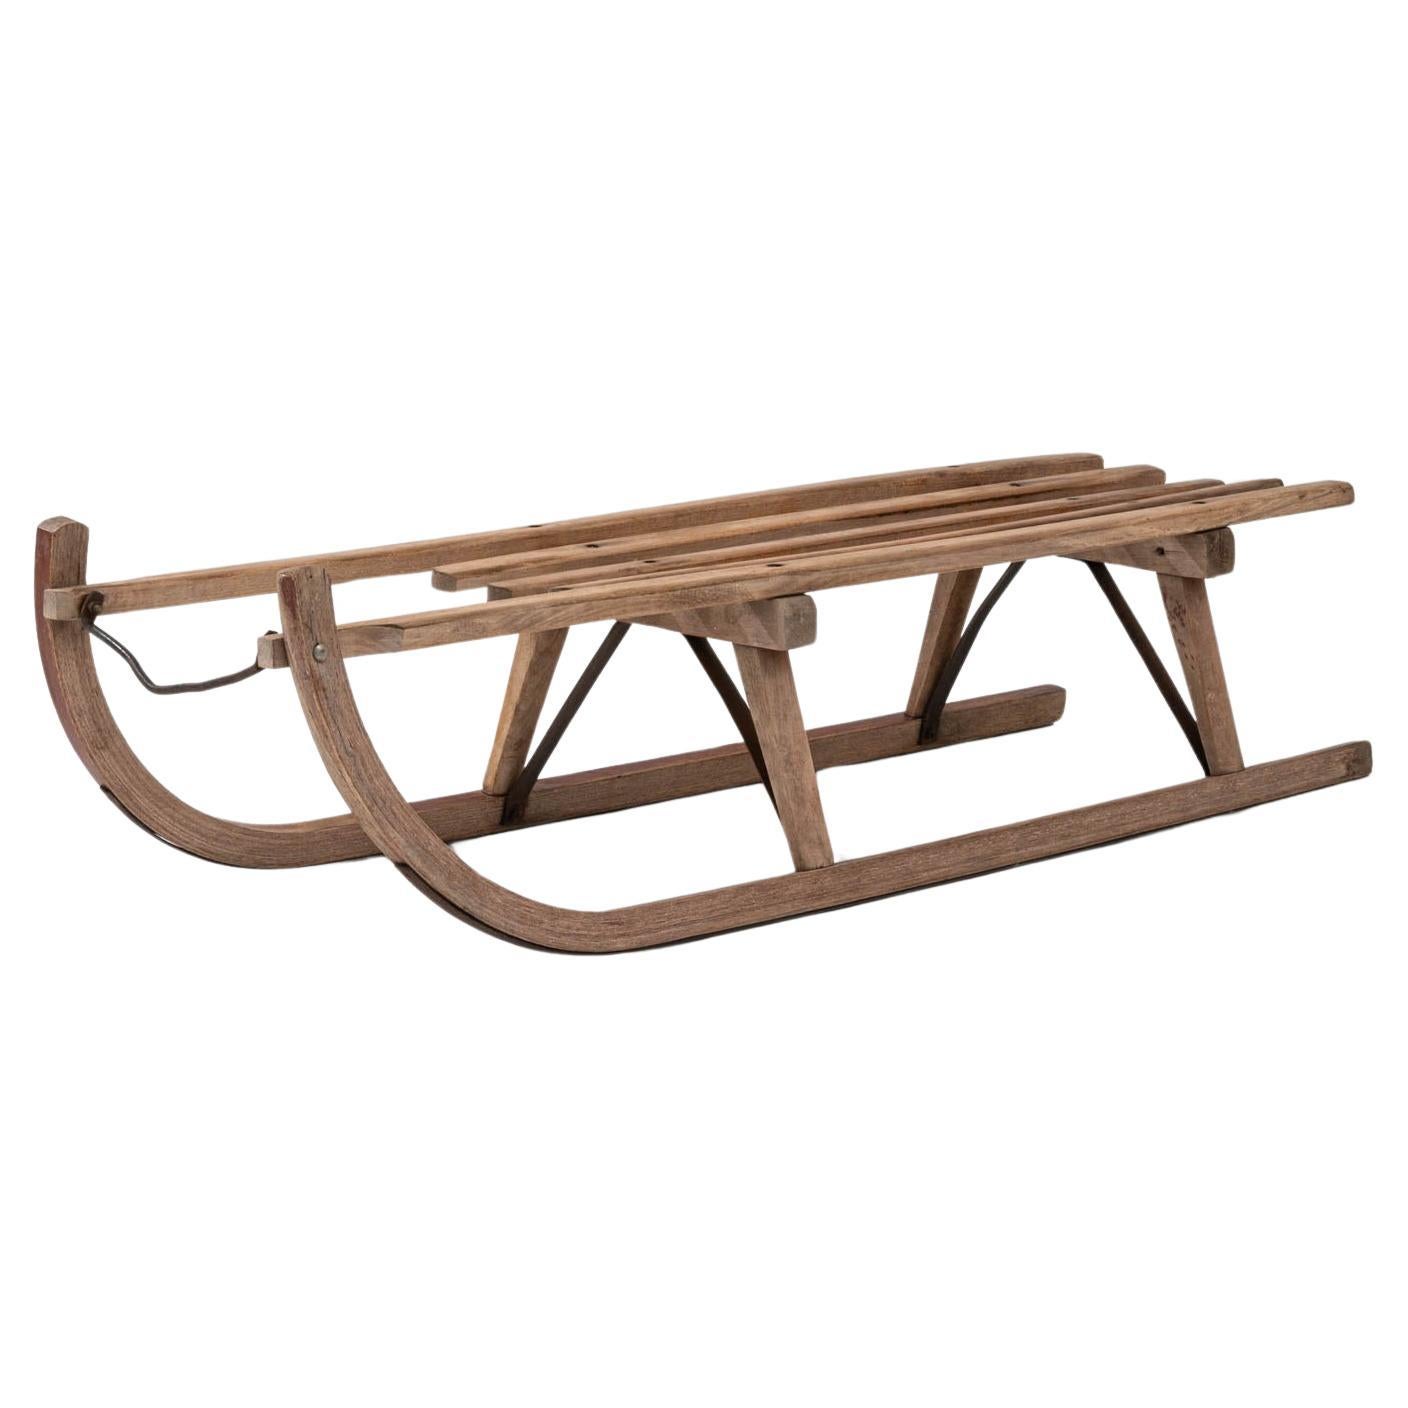 20th Century German Wooden Sled By Davos For Sale